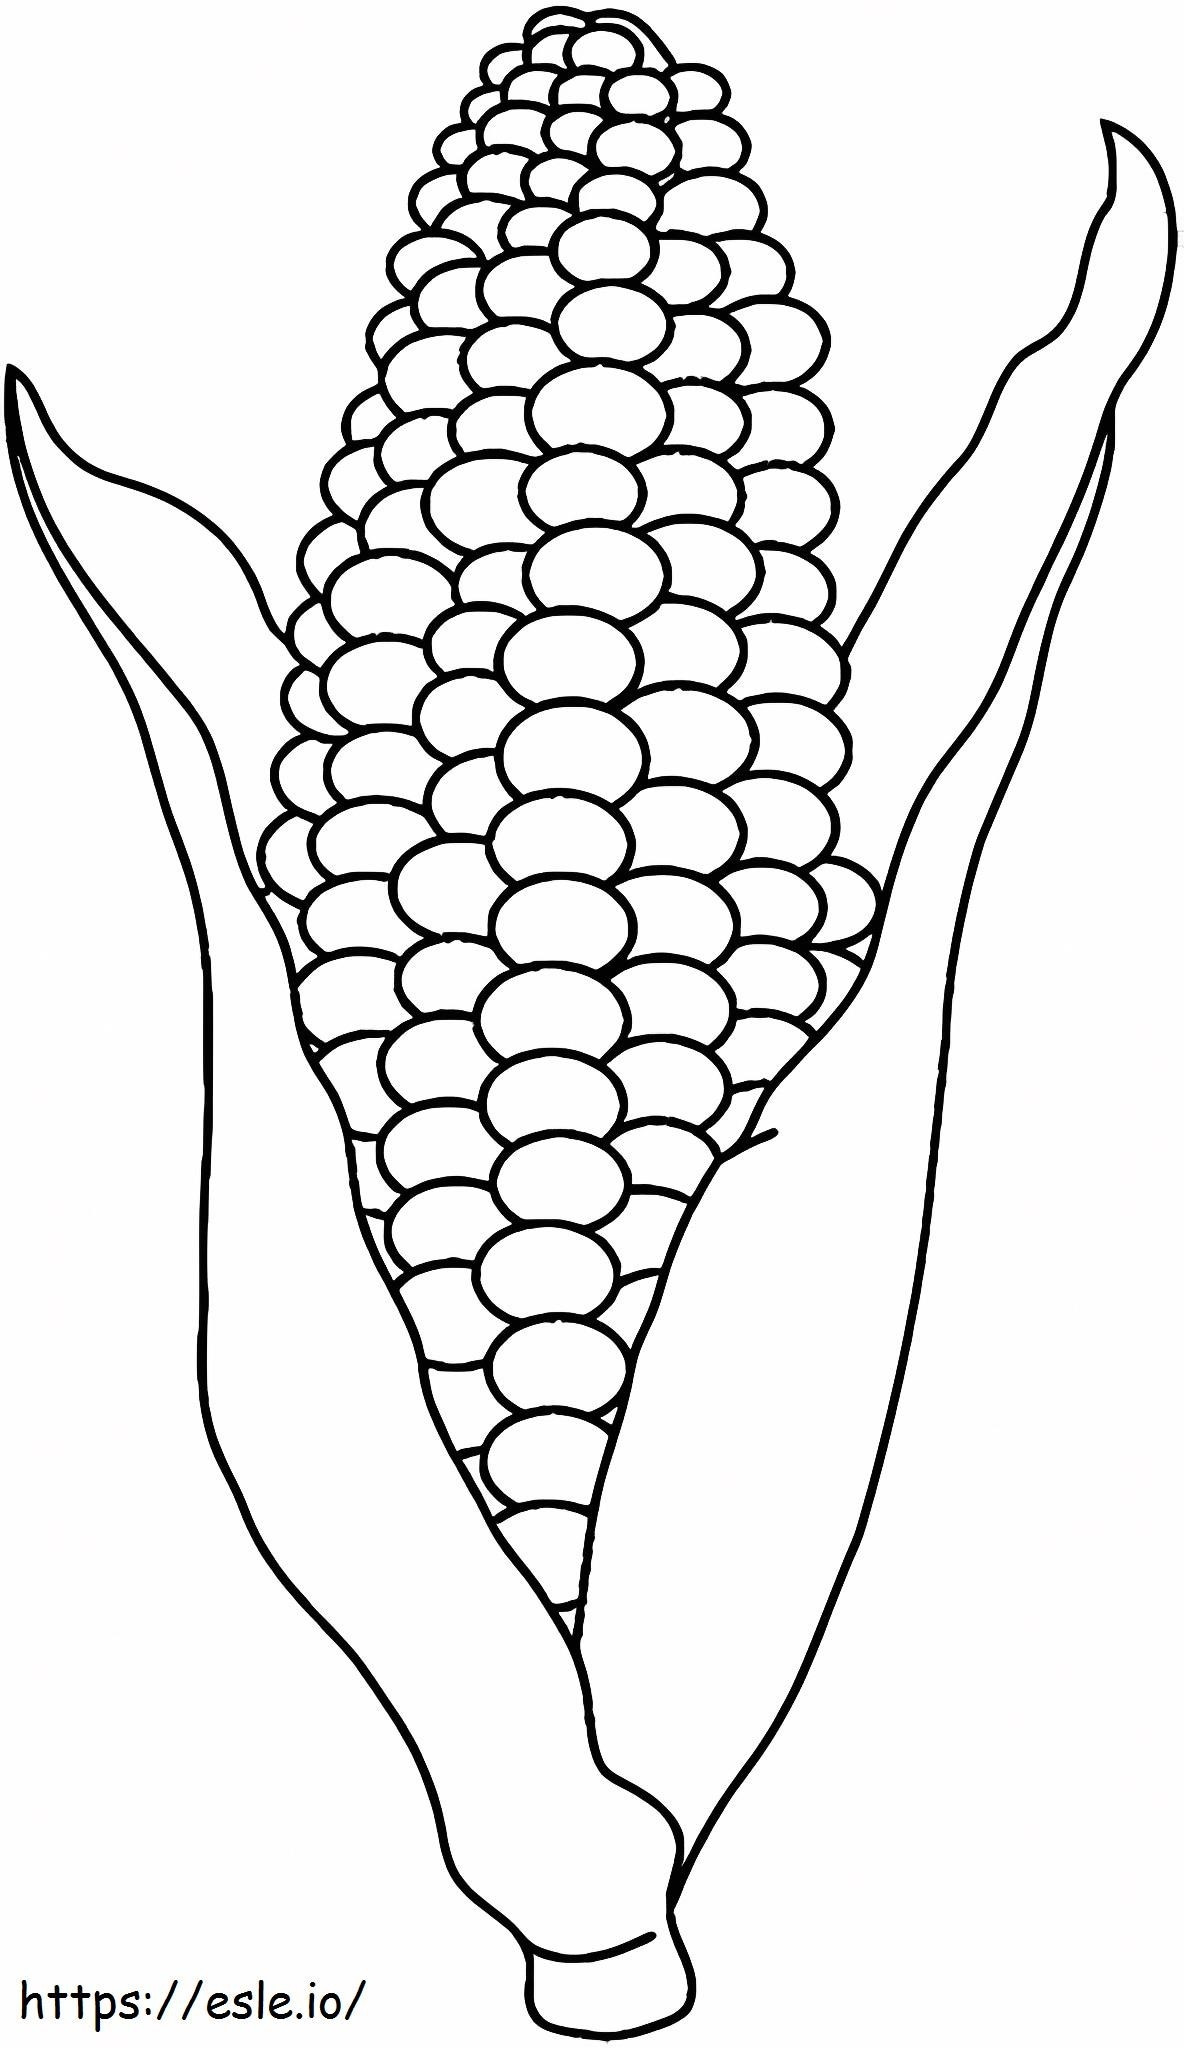 Ears Of Corn Coloring Page coloring page